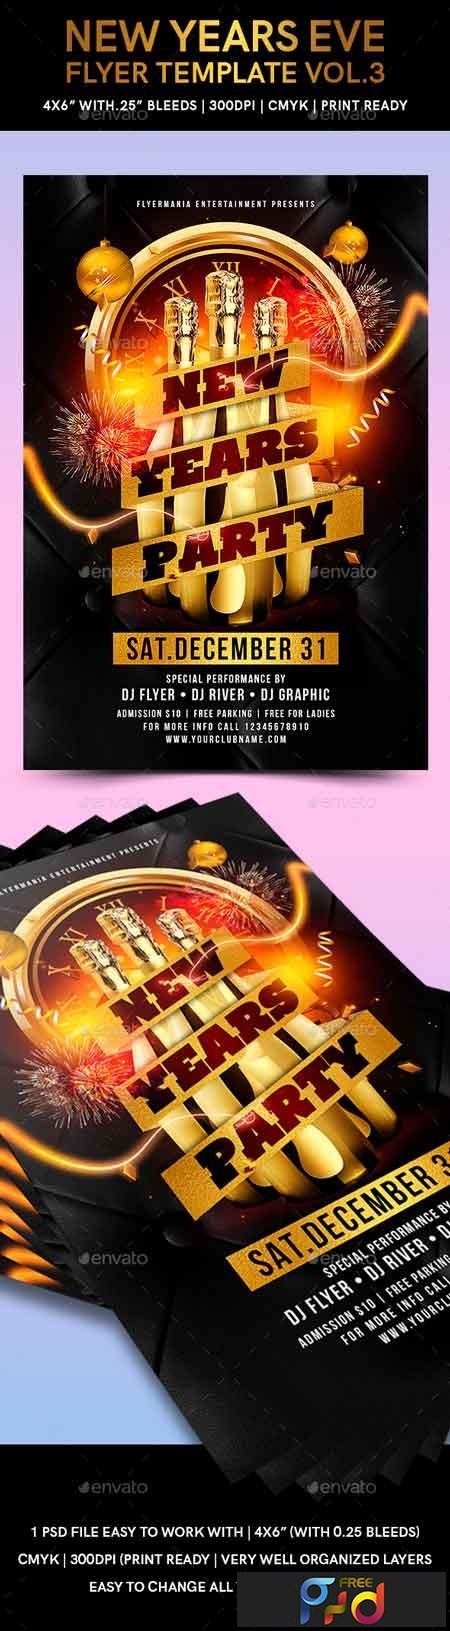 FreePsdVn.com 1817137 TEMPLATE new years eve flyer template vol 3 22817997